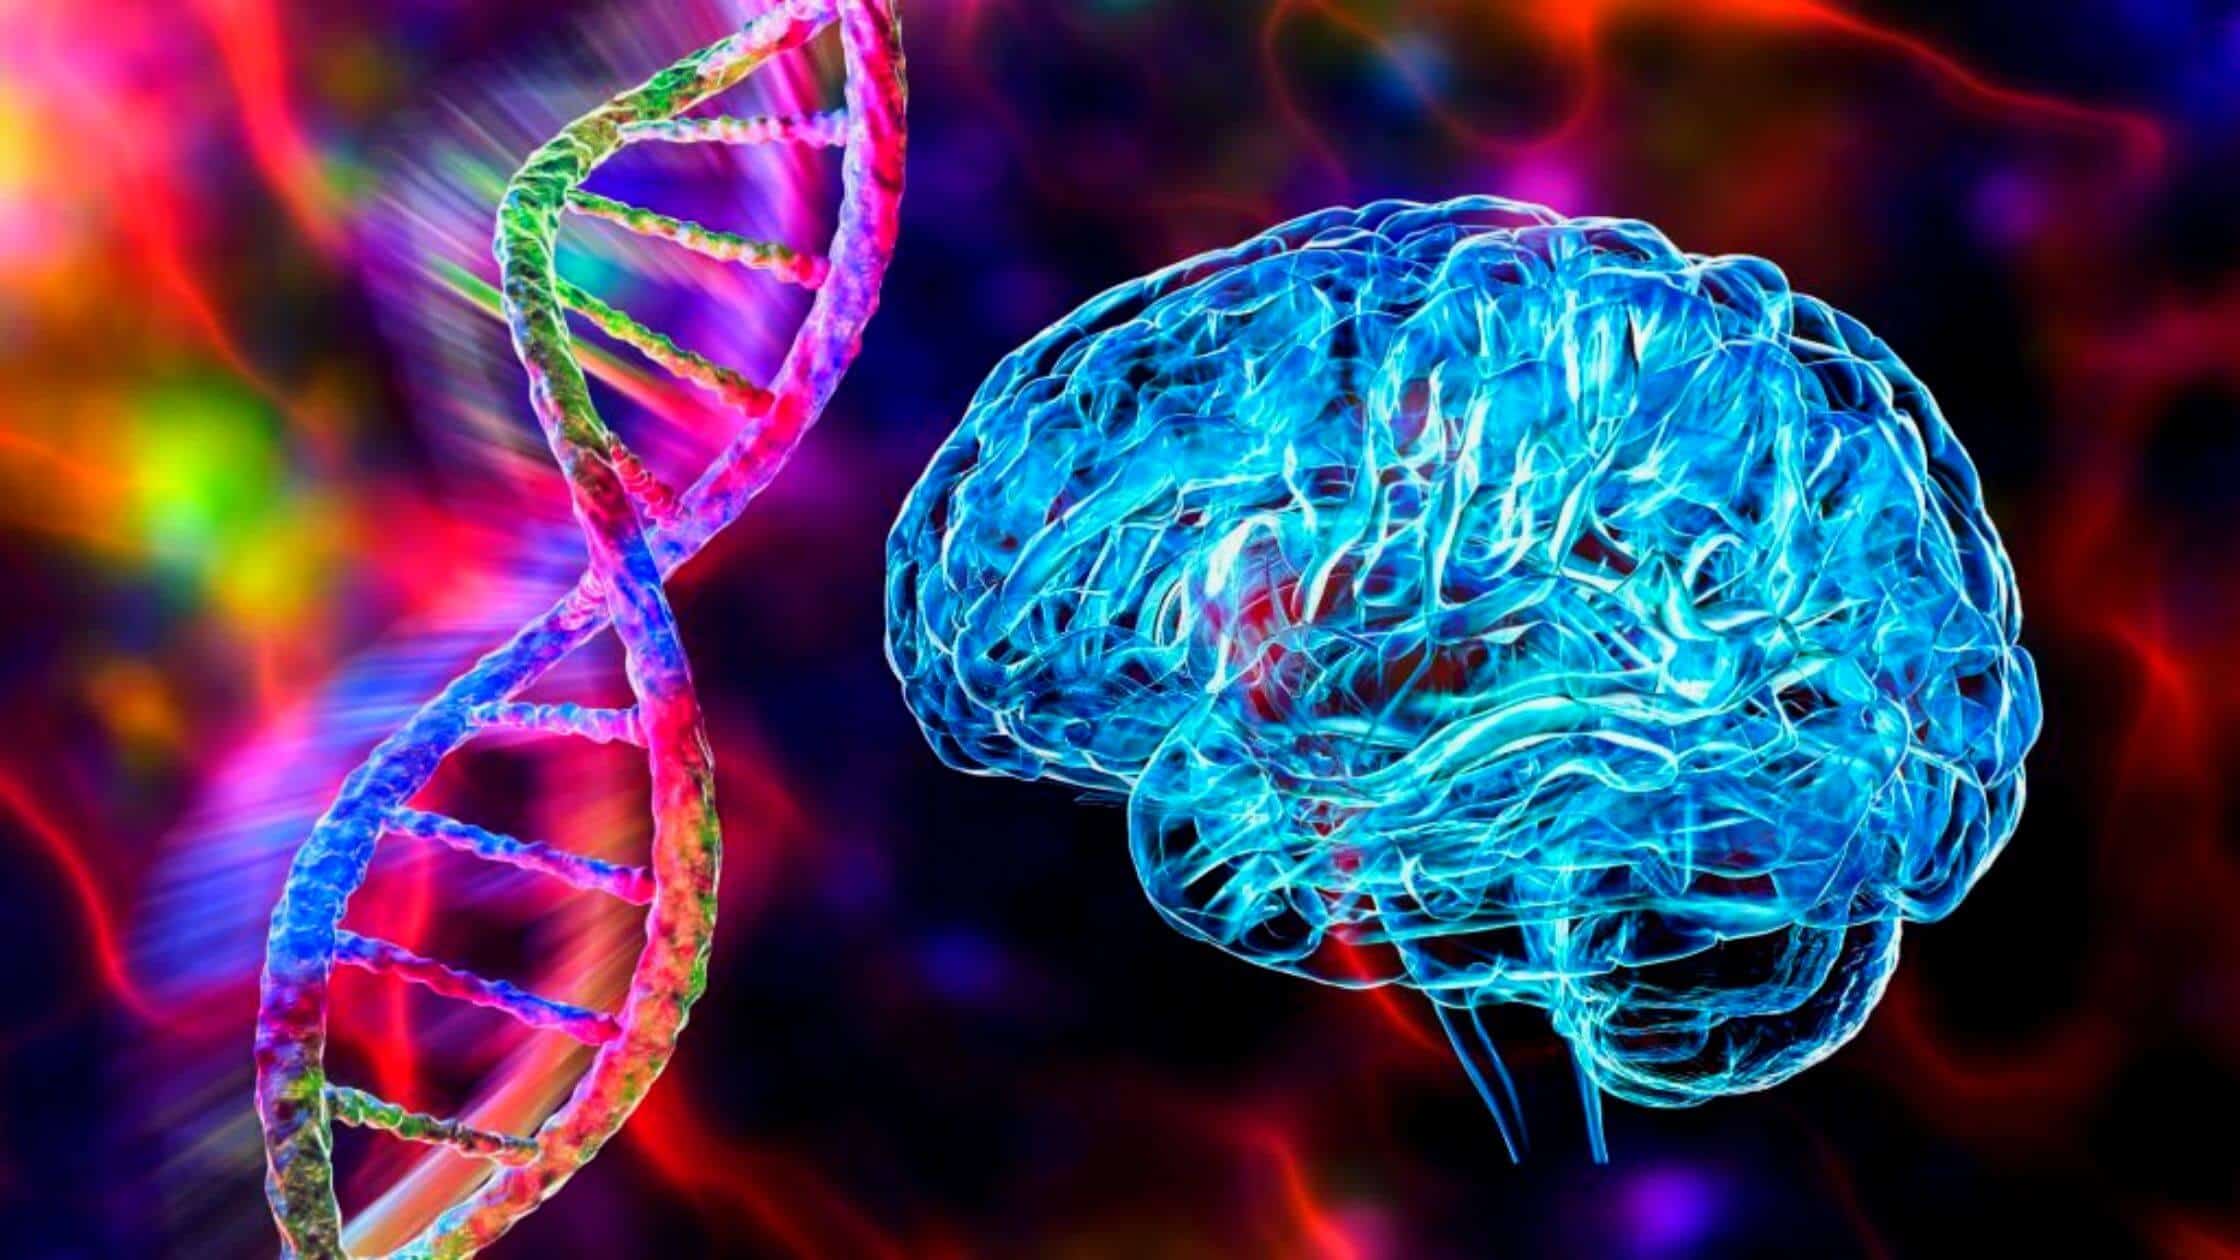 A Group Of Scientists Officially Urges Linking Genetic Research And Mental Health Care